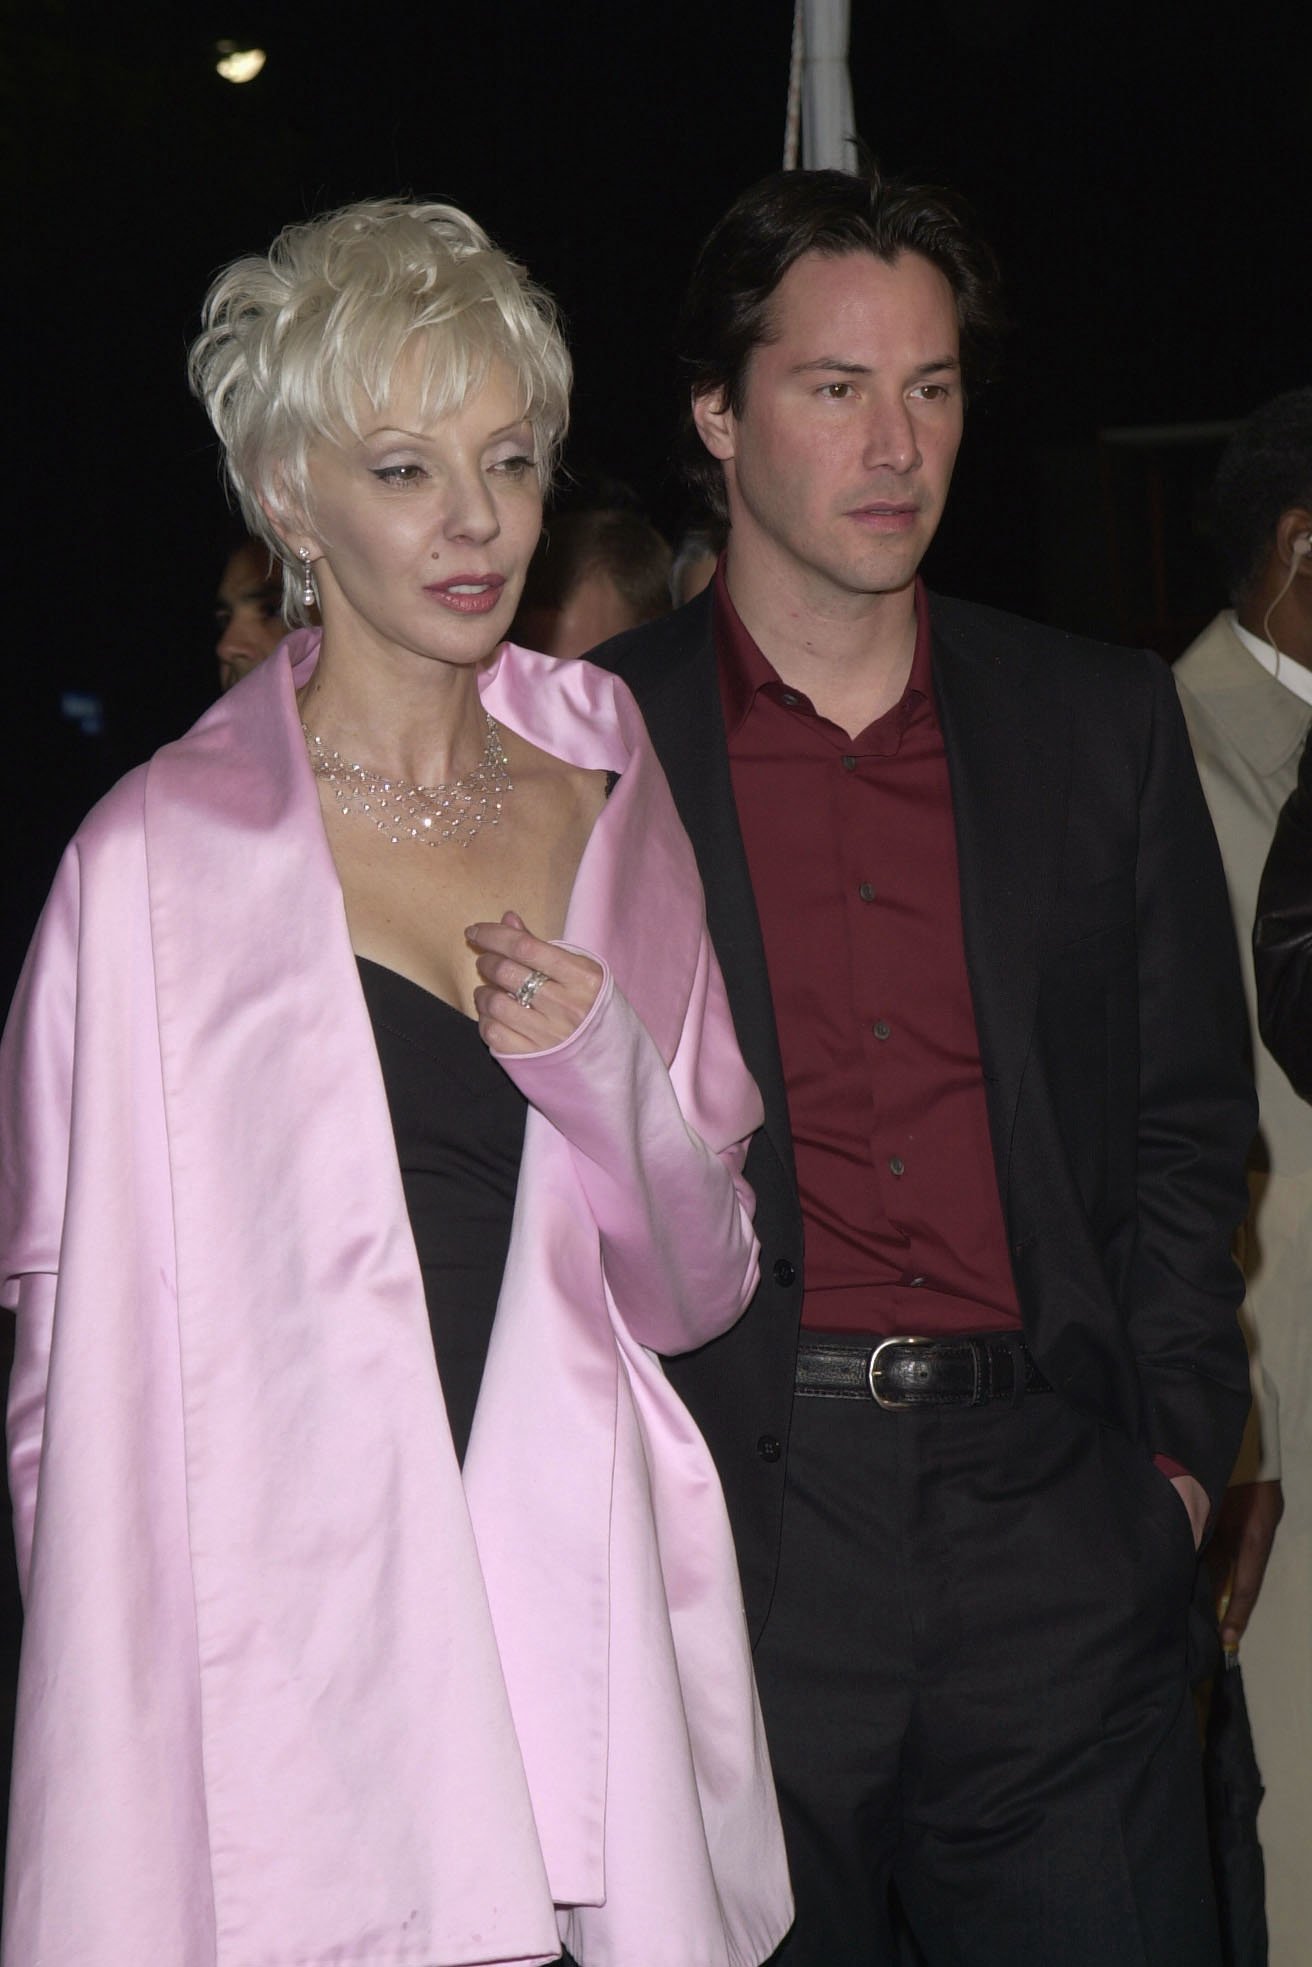 Patricia Taylor and Keanu Reeves at the premiere of "Sweet November" on February 12, 2001. | Source: Getty Images